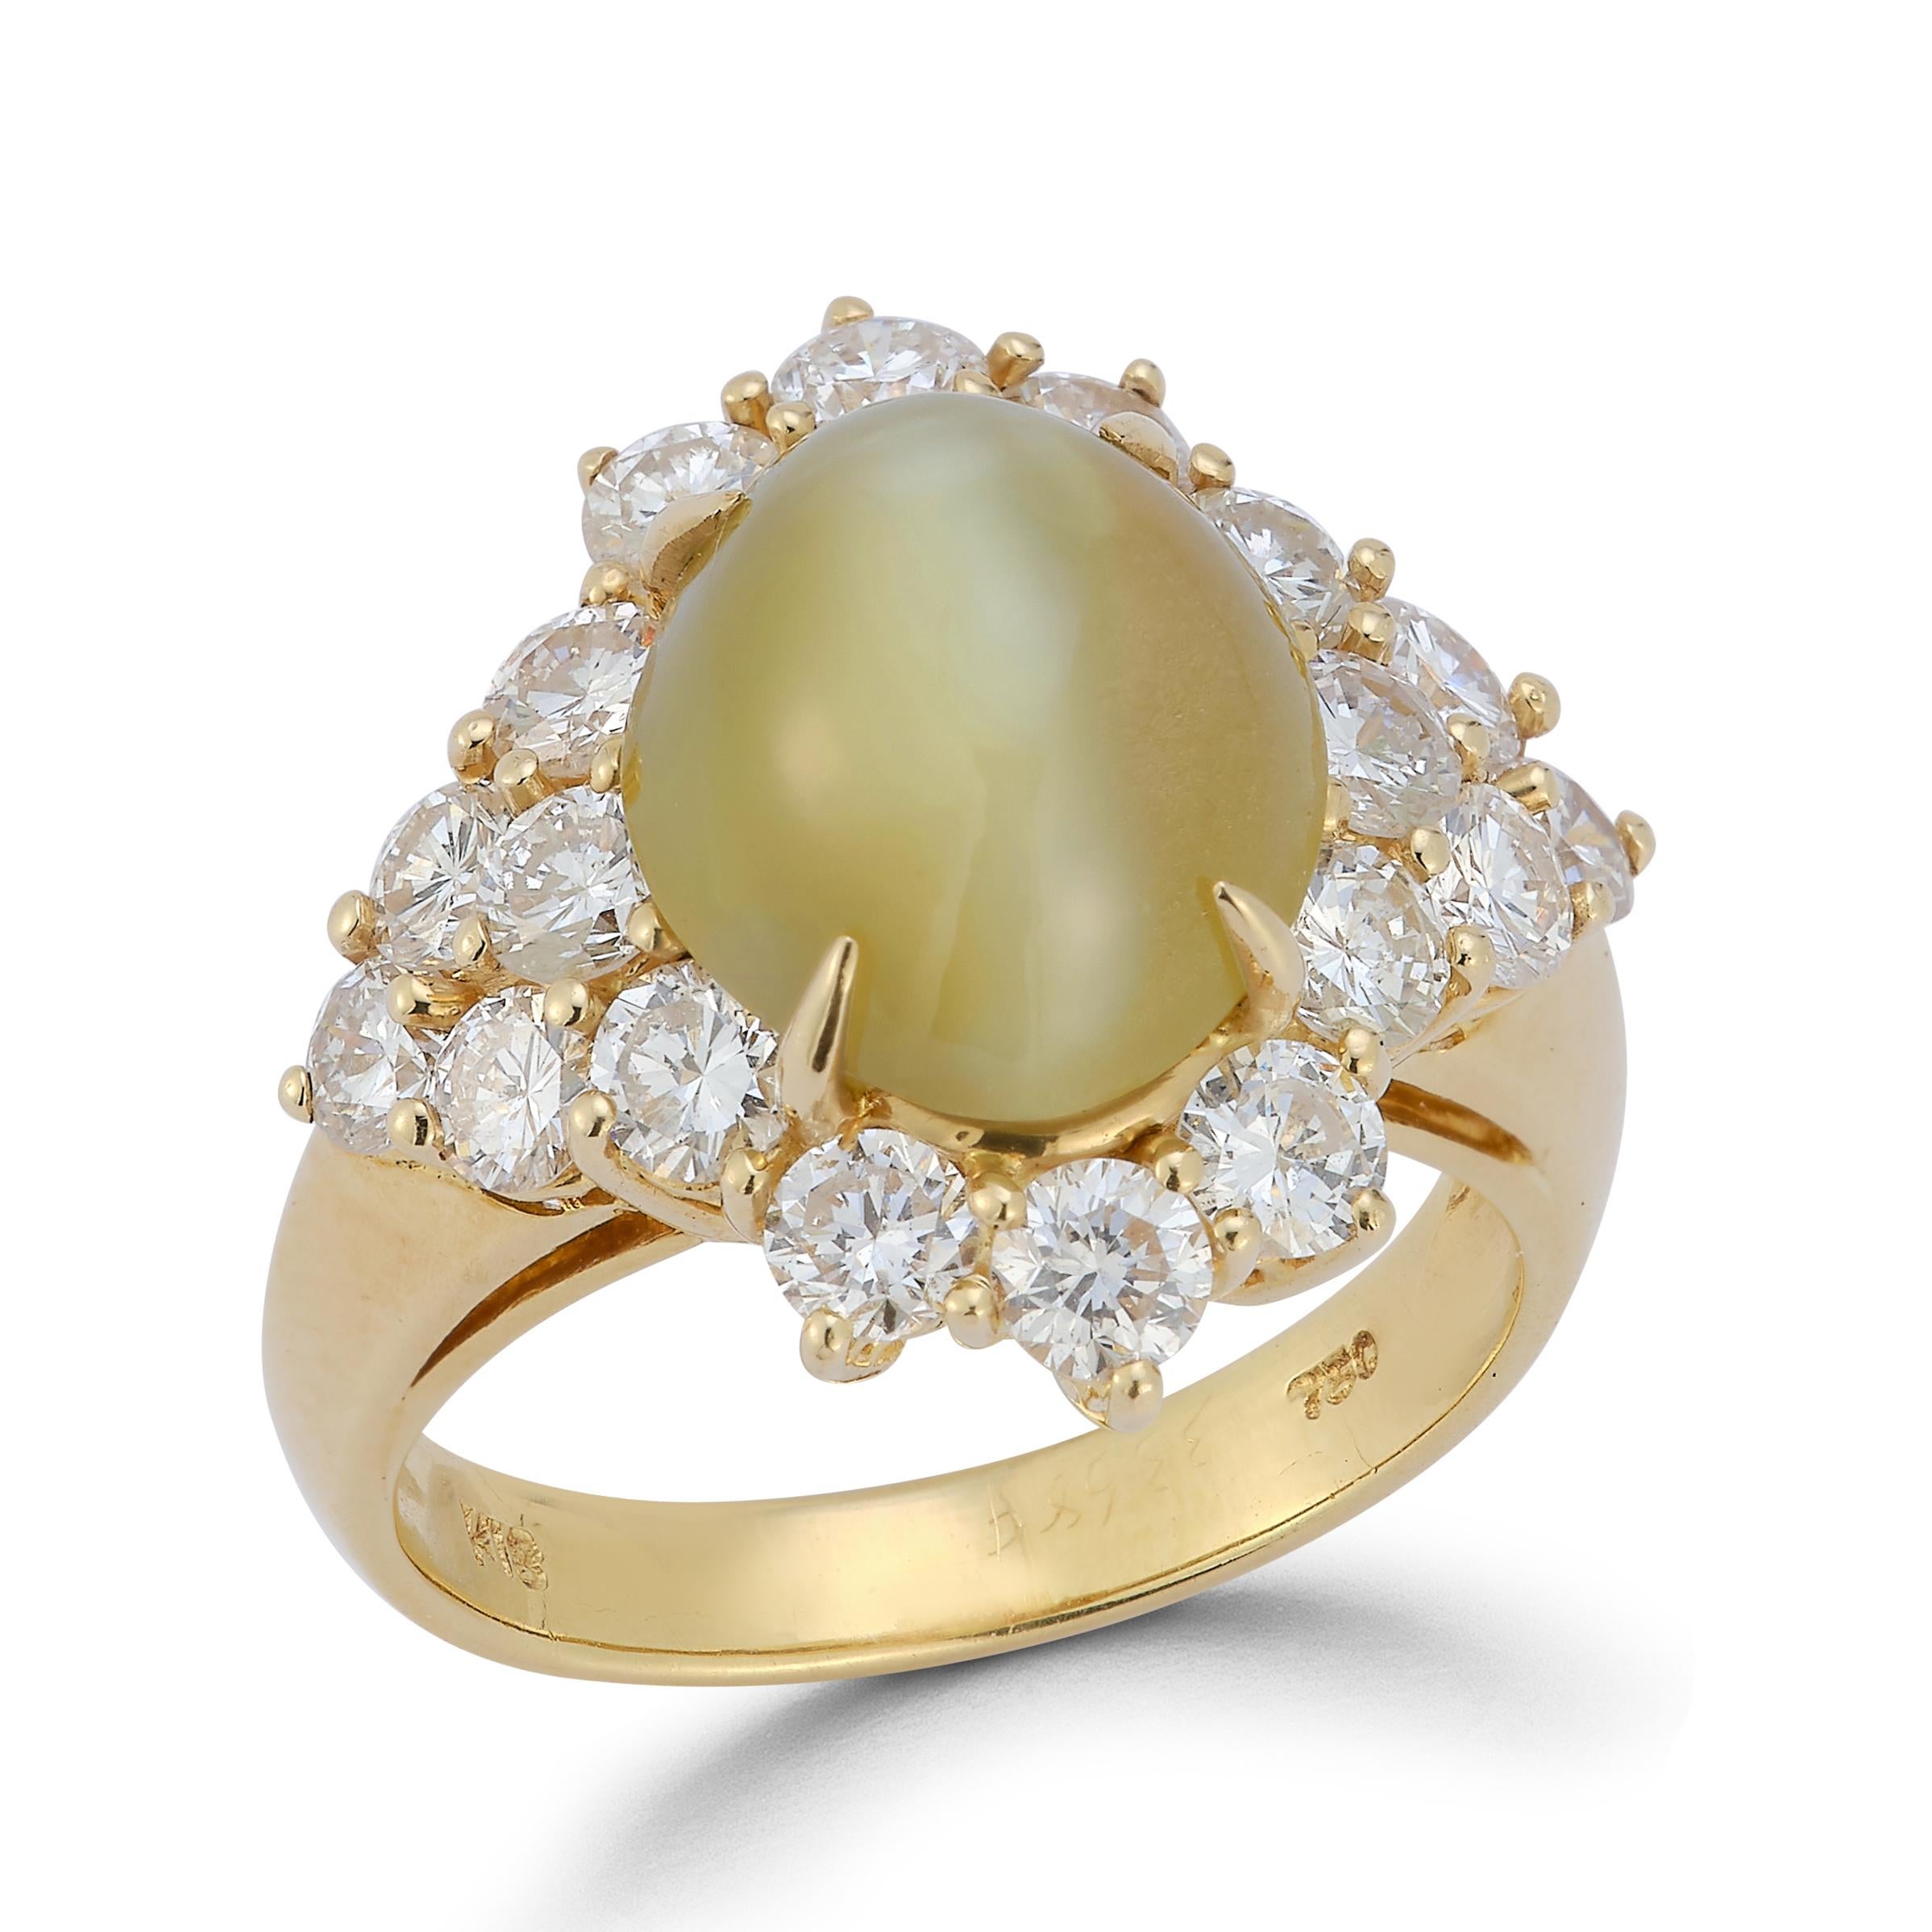 Cabochon Chrysoberyl Cats Eye & Diamond Ring 
18K Yellow Gold 
Ring size: 6.75
Re-sizable free of charge 
